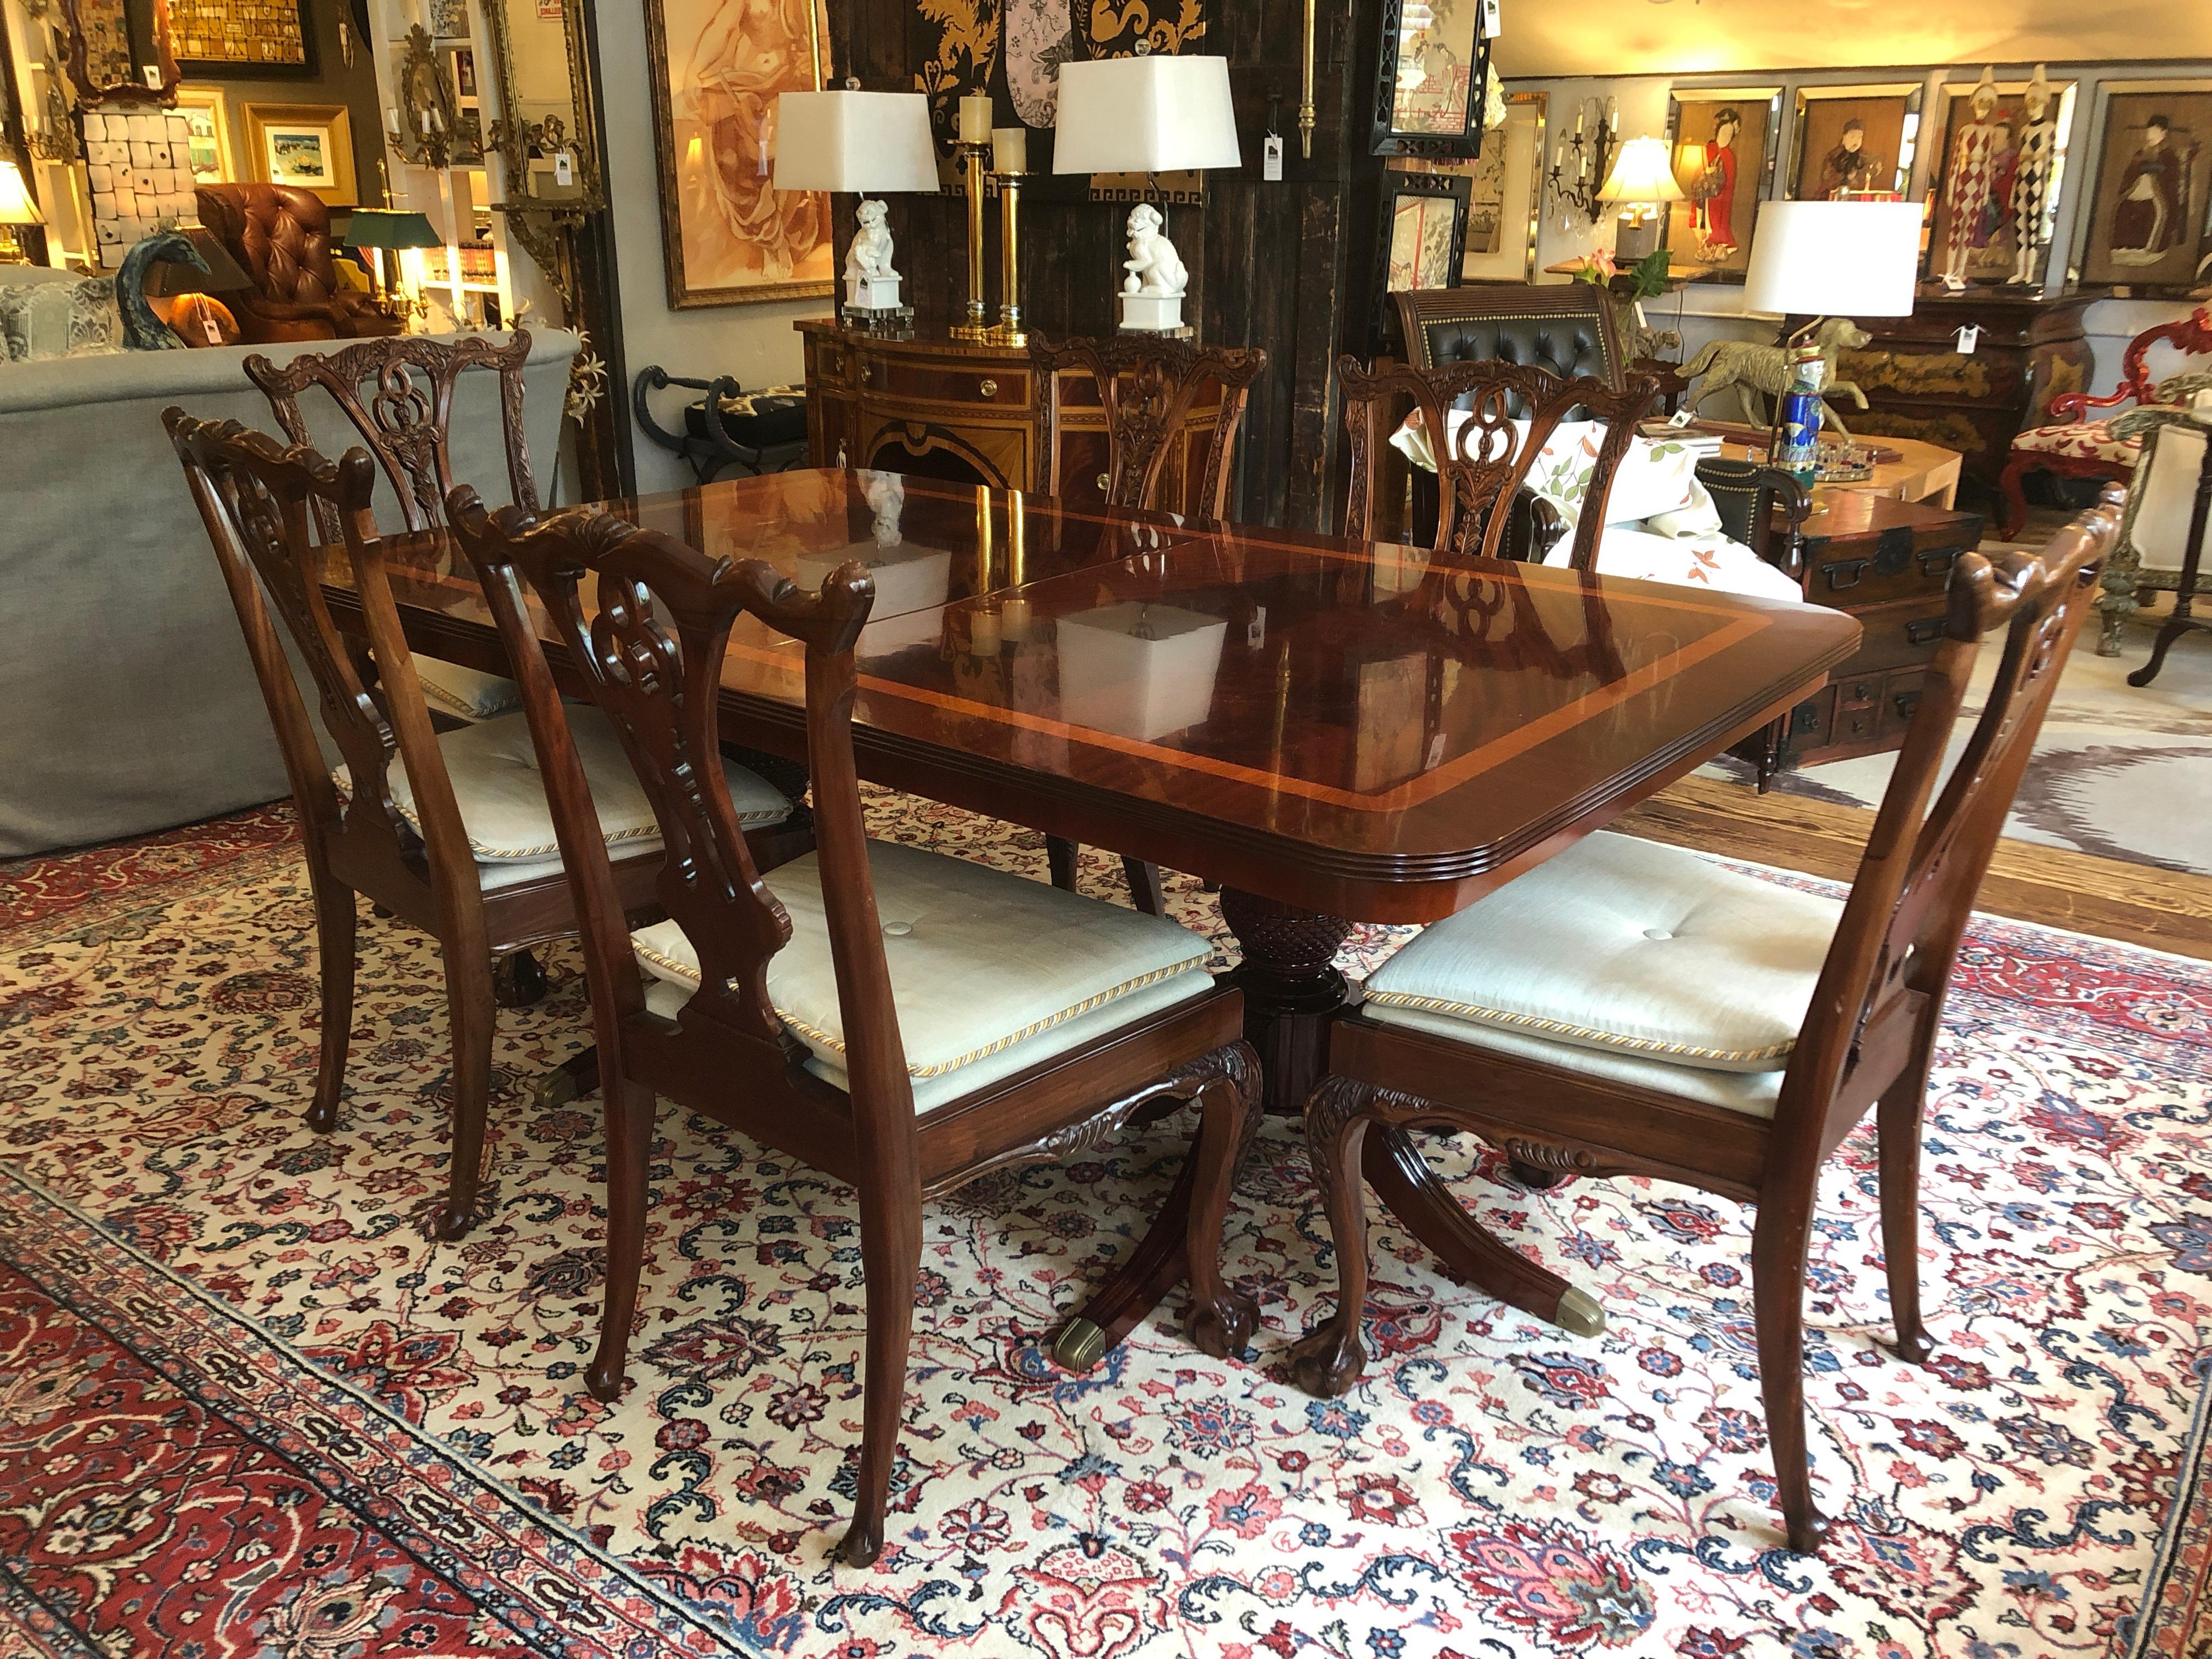 A stately Georgian style double pedestal mahogany dining table featuring a stunning satinwood band inside a cross-banded mahogany edge, with beautiful crotch veneer in the centre of the tabletop. The pedestals have inverted acorn like forms resting